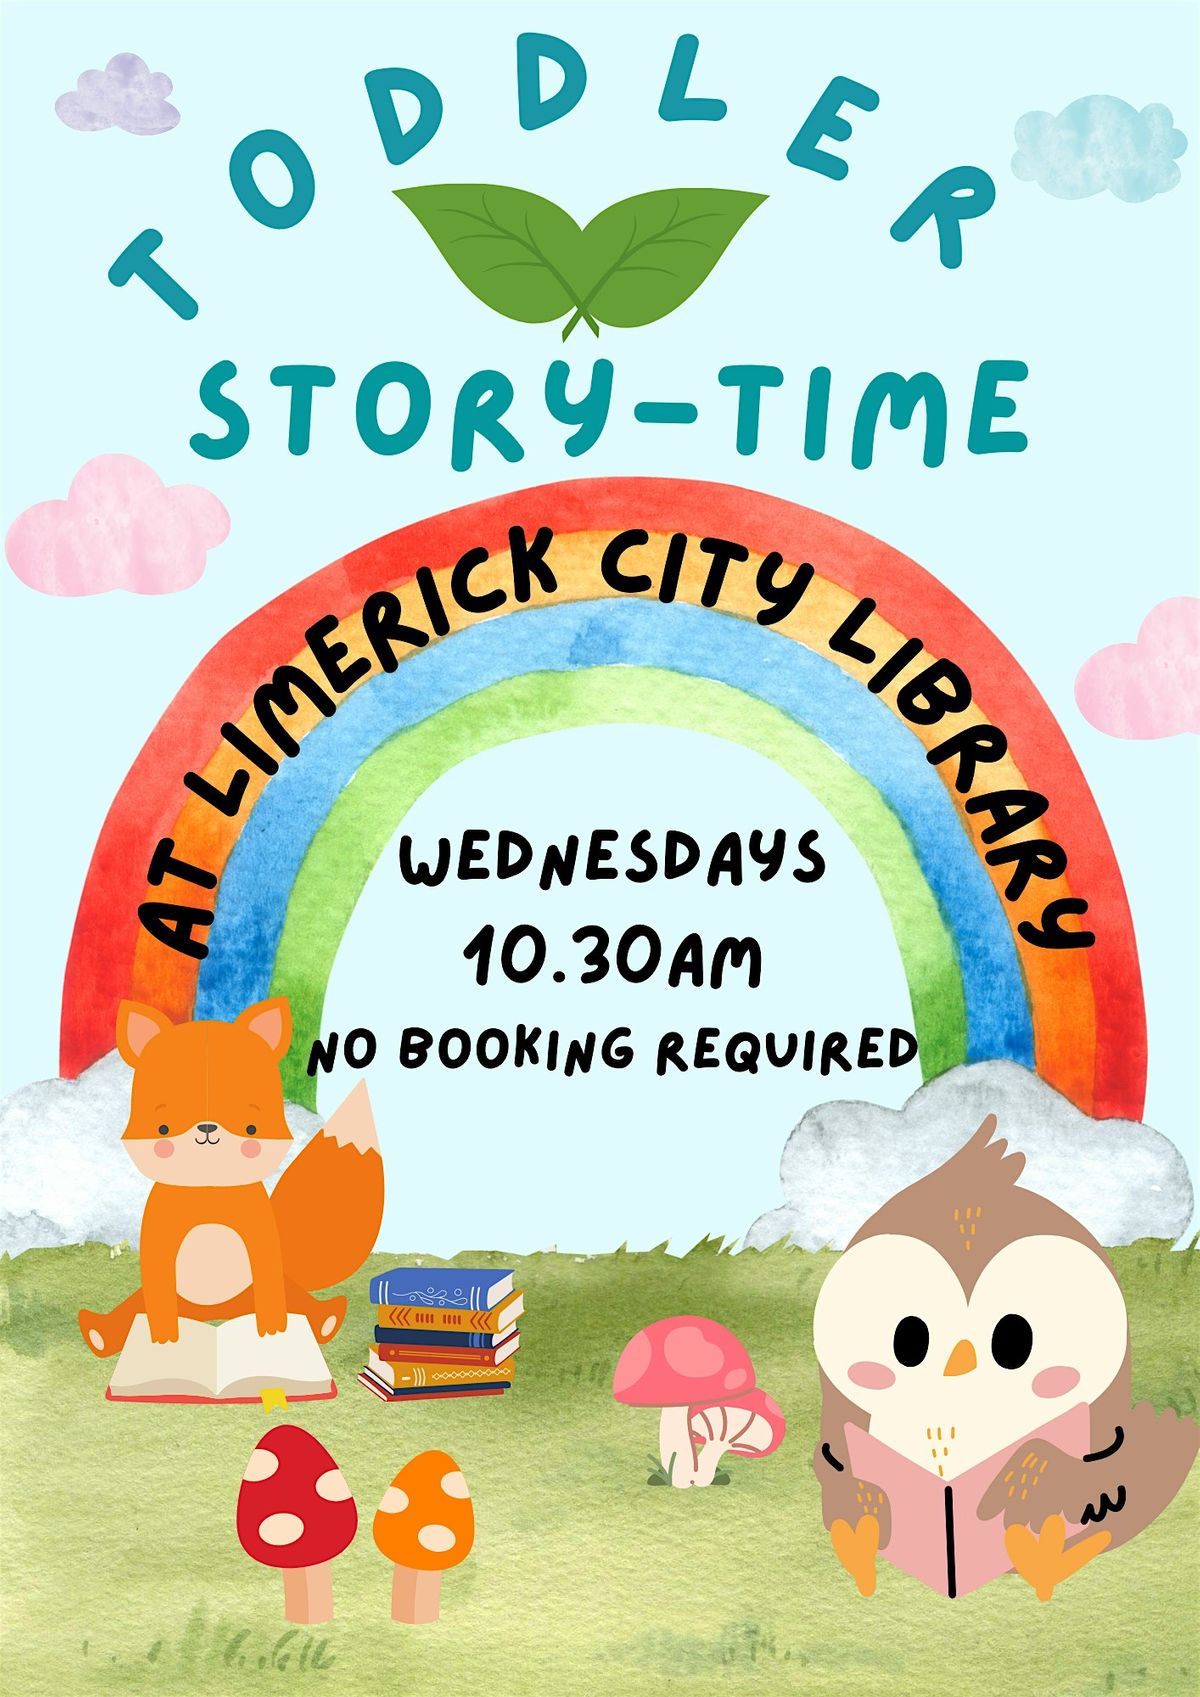 Parent and Toddler Storytime @ Limerick City Library